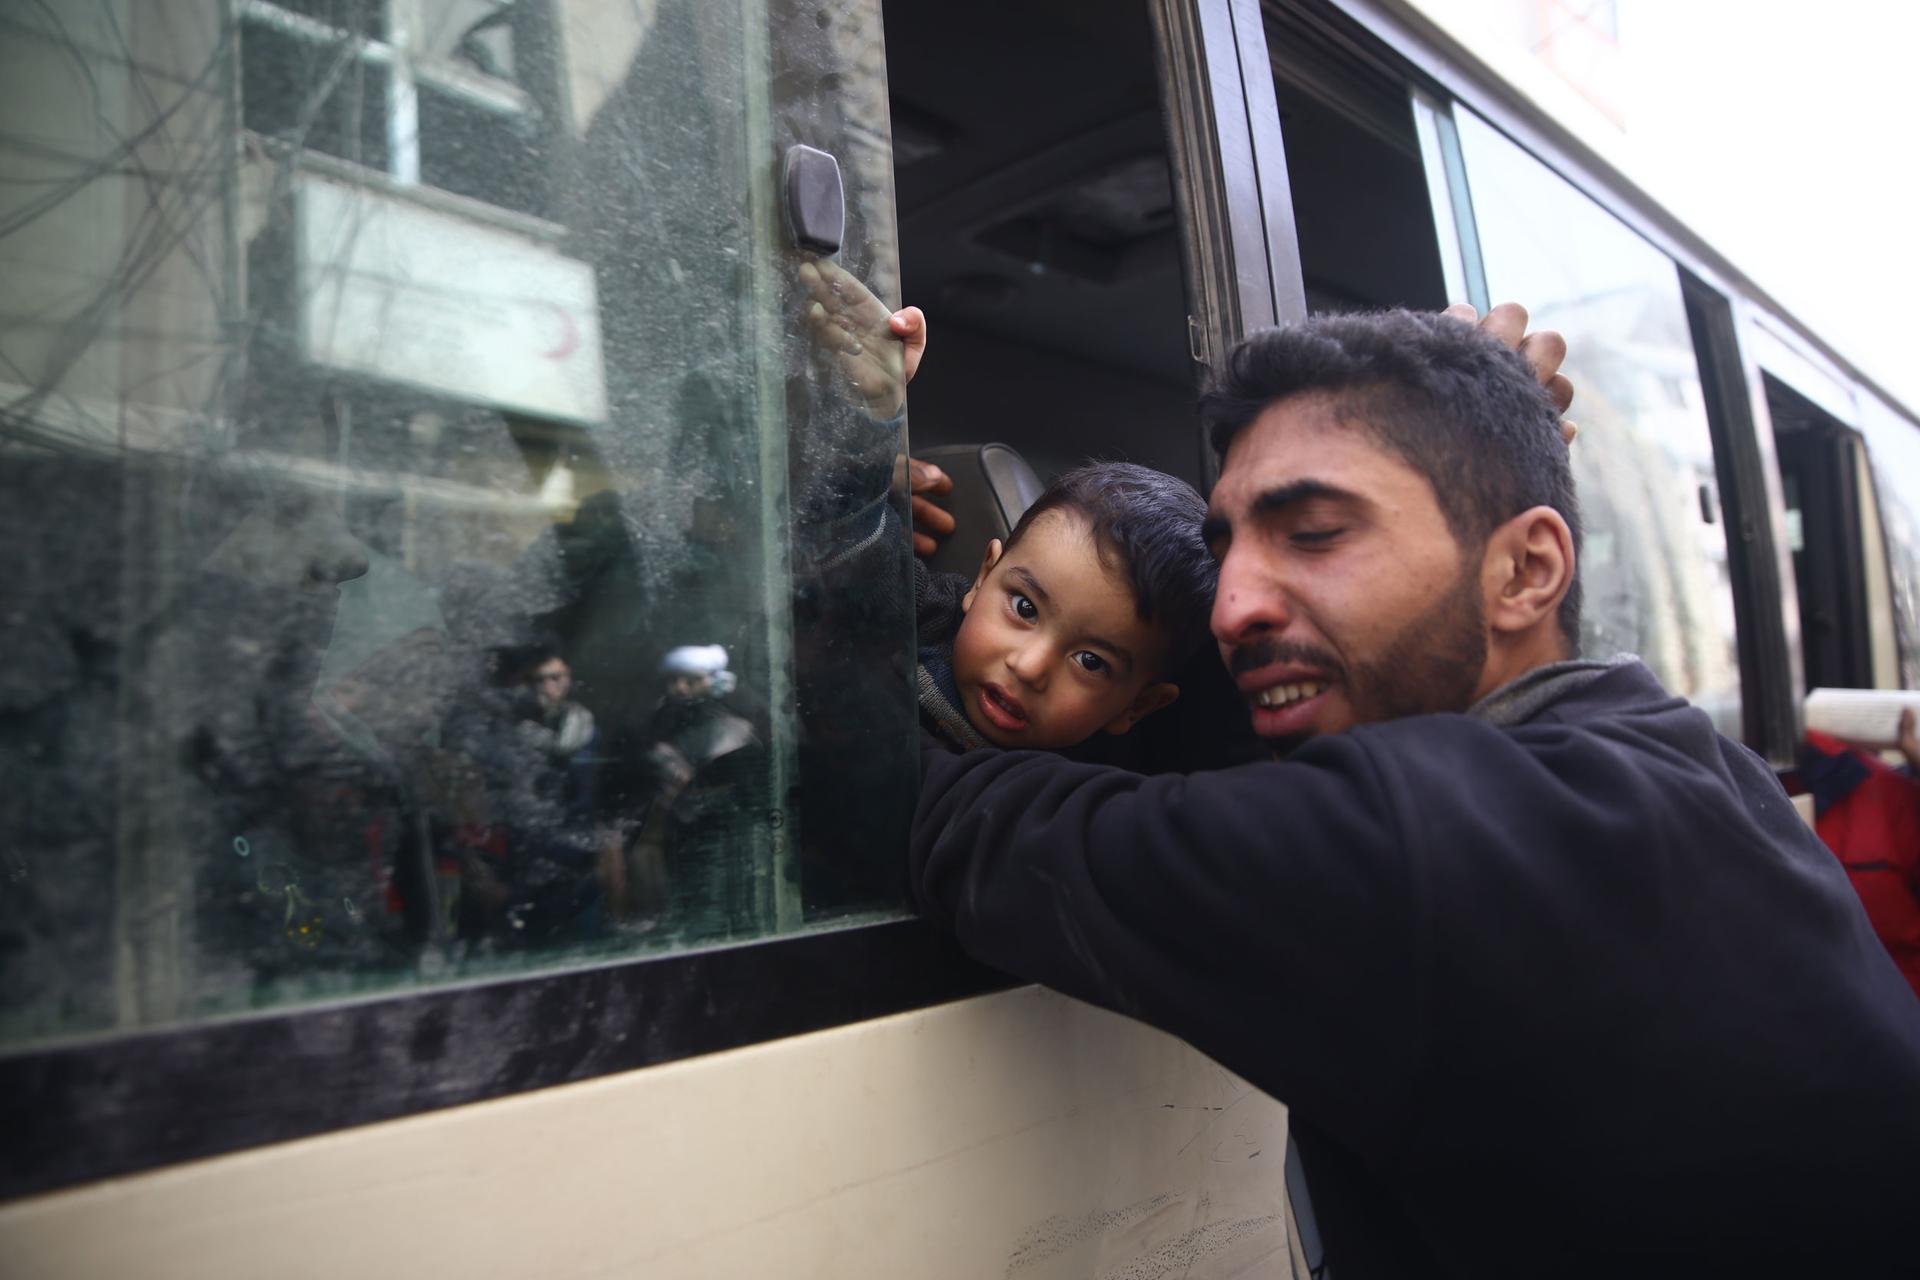 A man is shown reaching into a bus window and hugging his young son whom is staring at the camera.